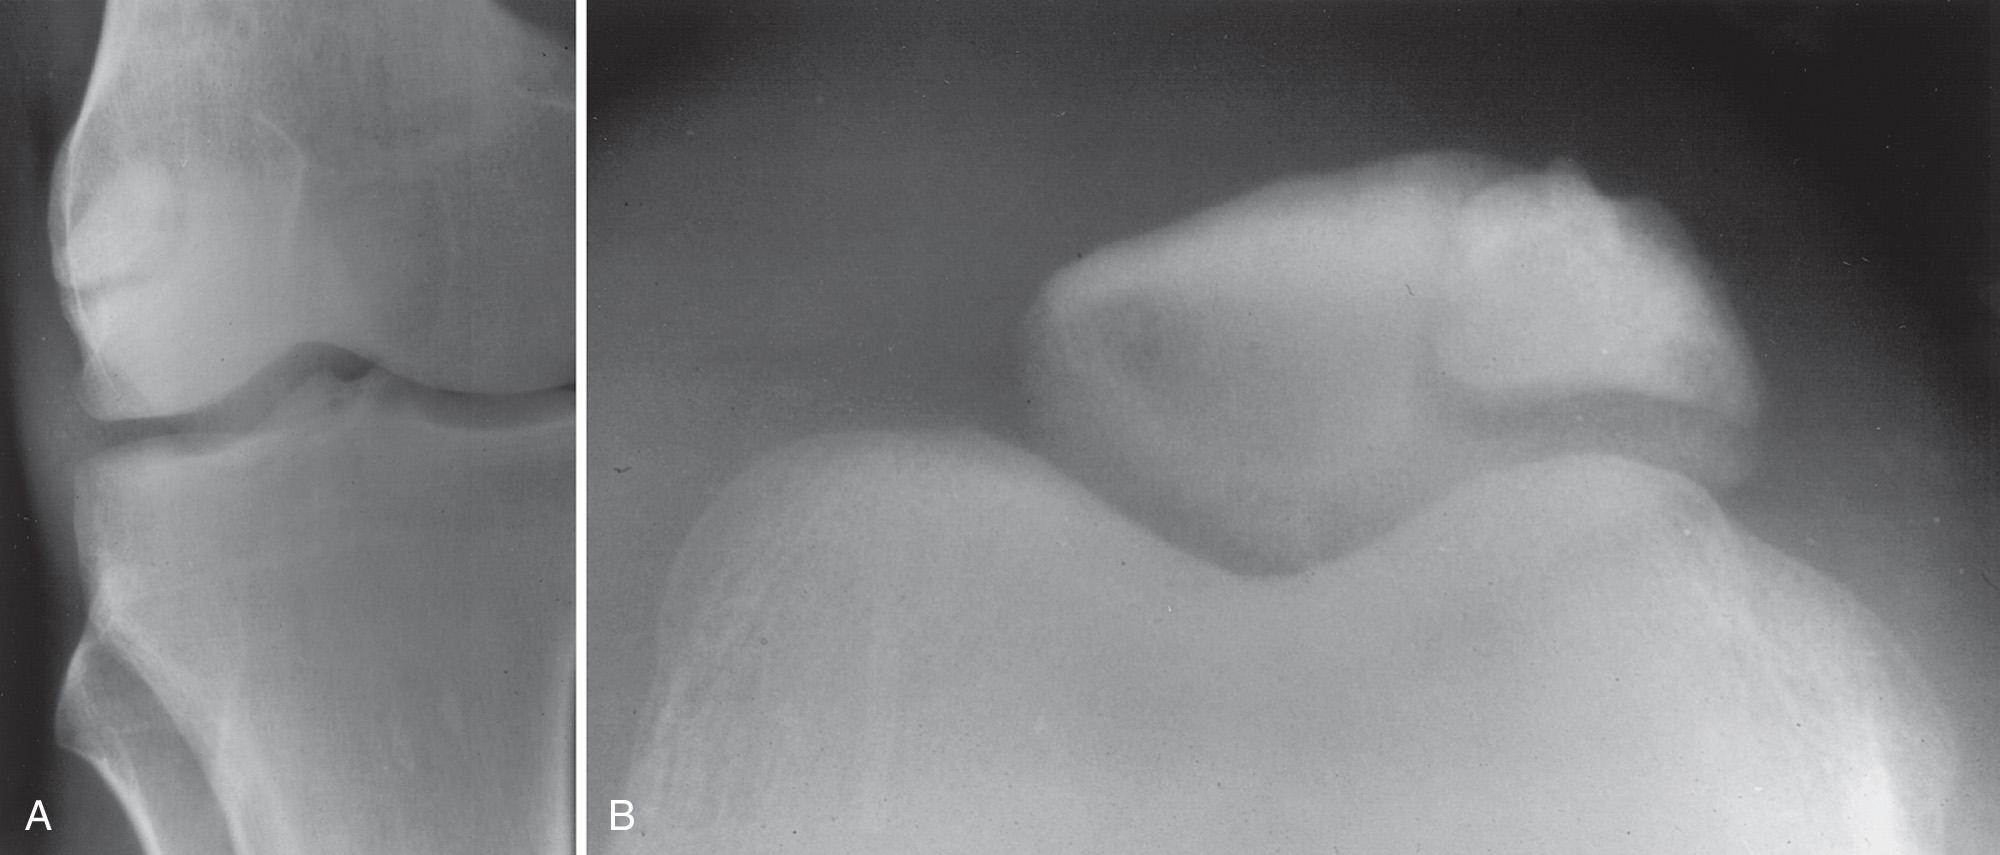 FIG 2.2, Oblique (A) and tangential axial (B) radiographs of a bipartite patella. The margins of the two fragments are relatively smooth and corticated.